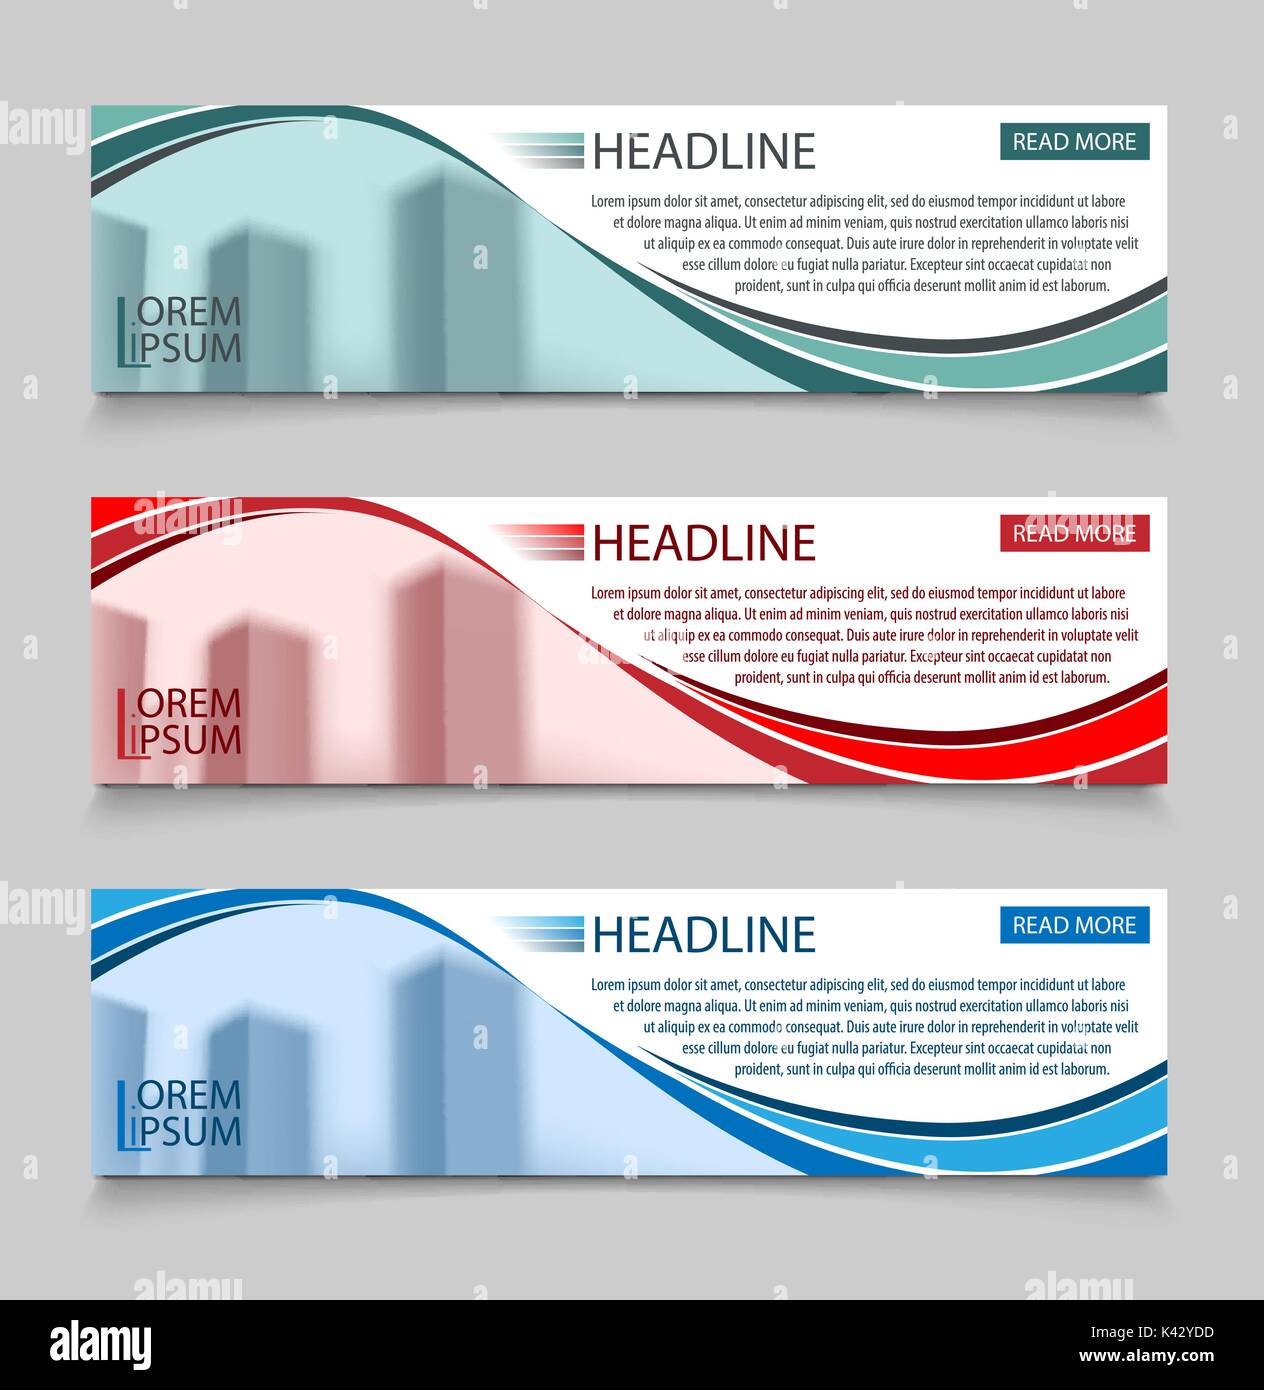 Website horizontal business banners vector template. Abstract banner design business concept design with healine for website, vector illustration Stock Vector